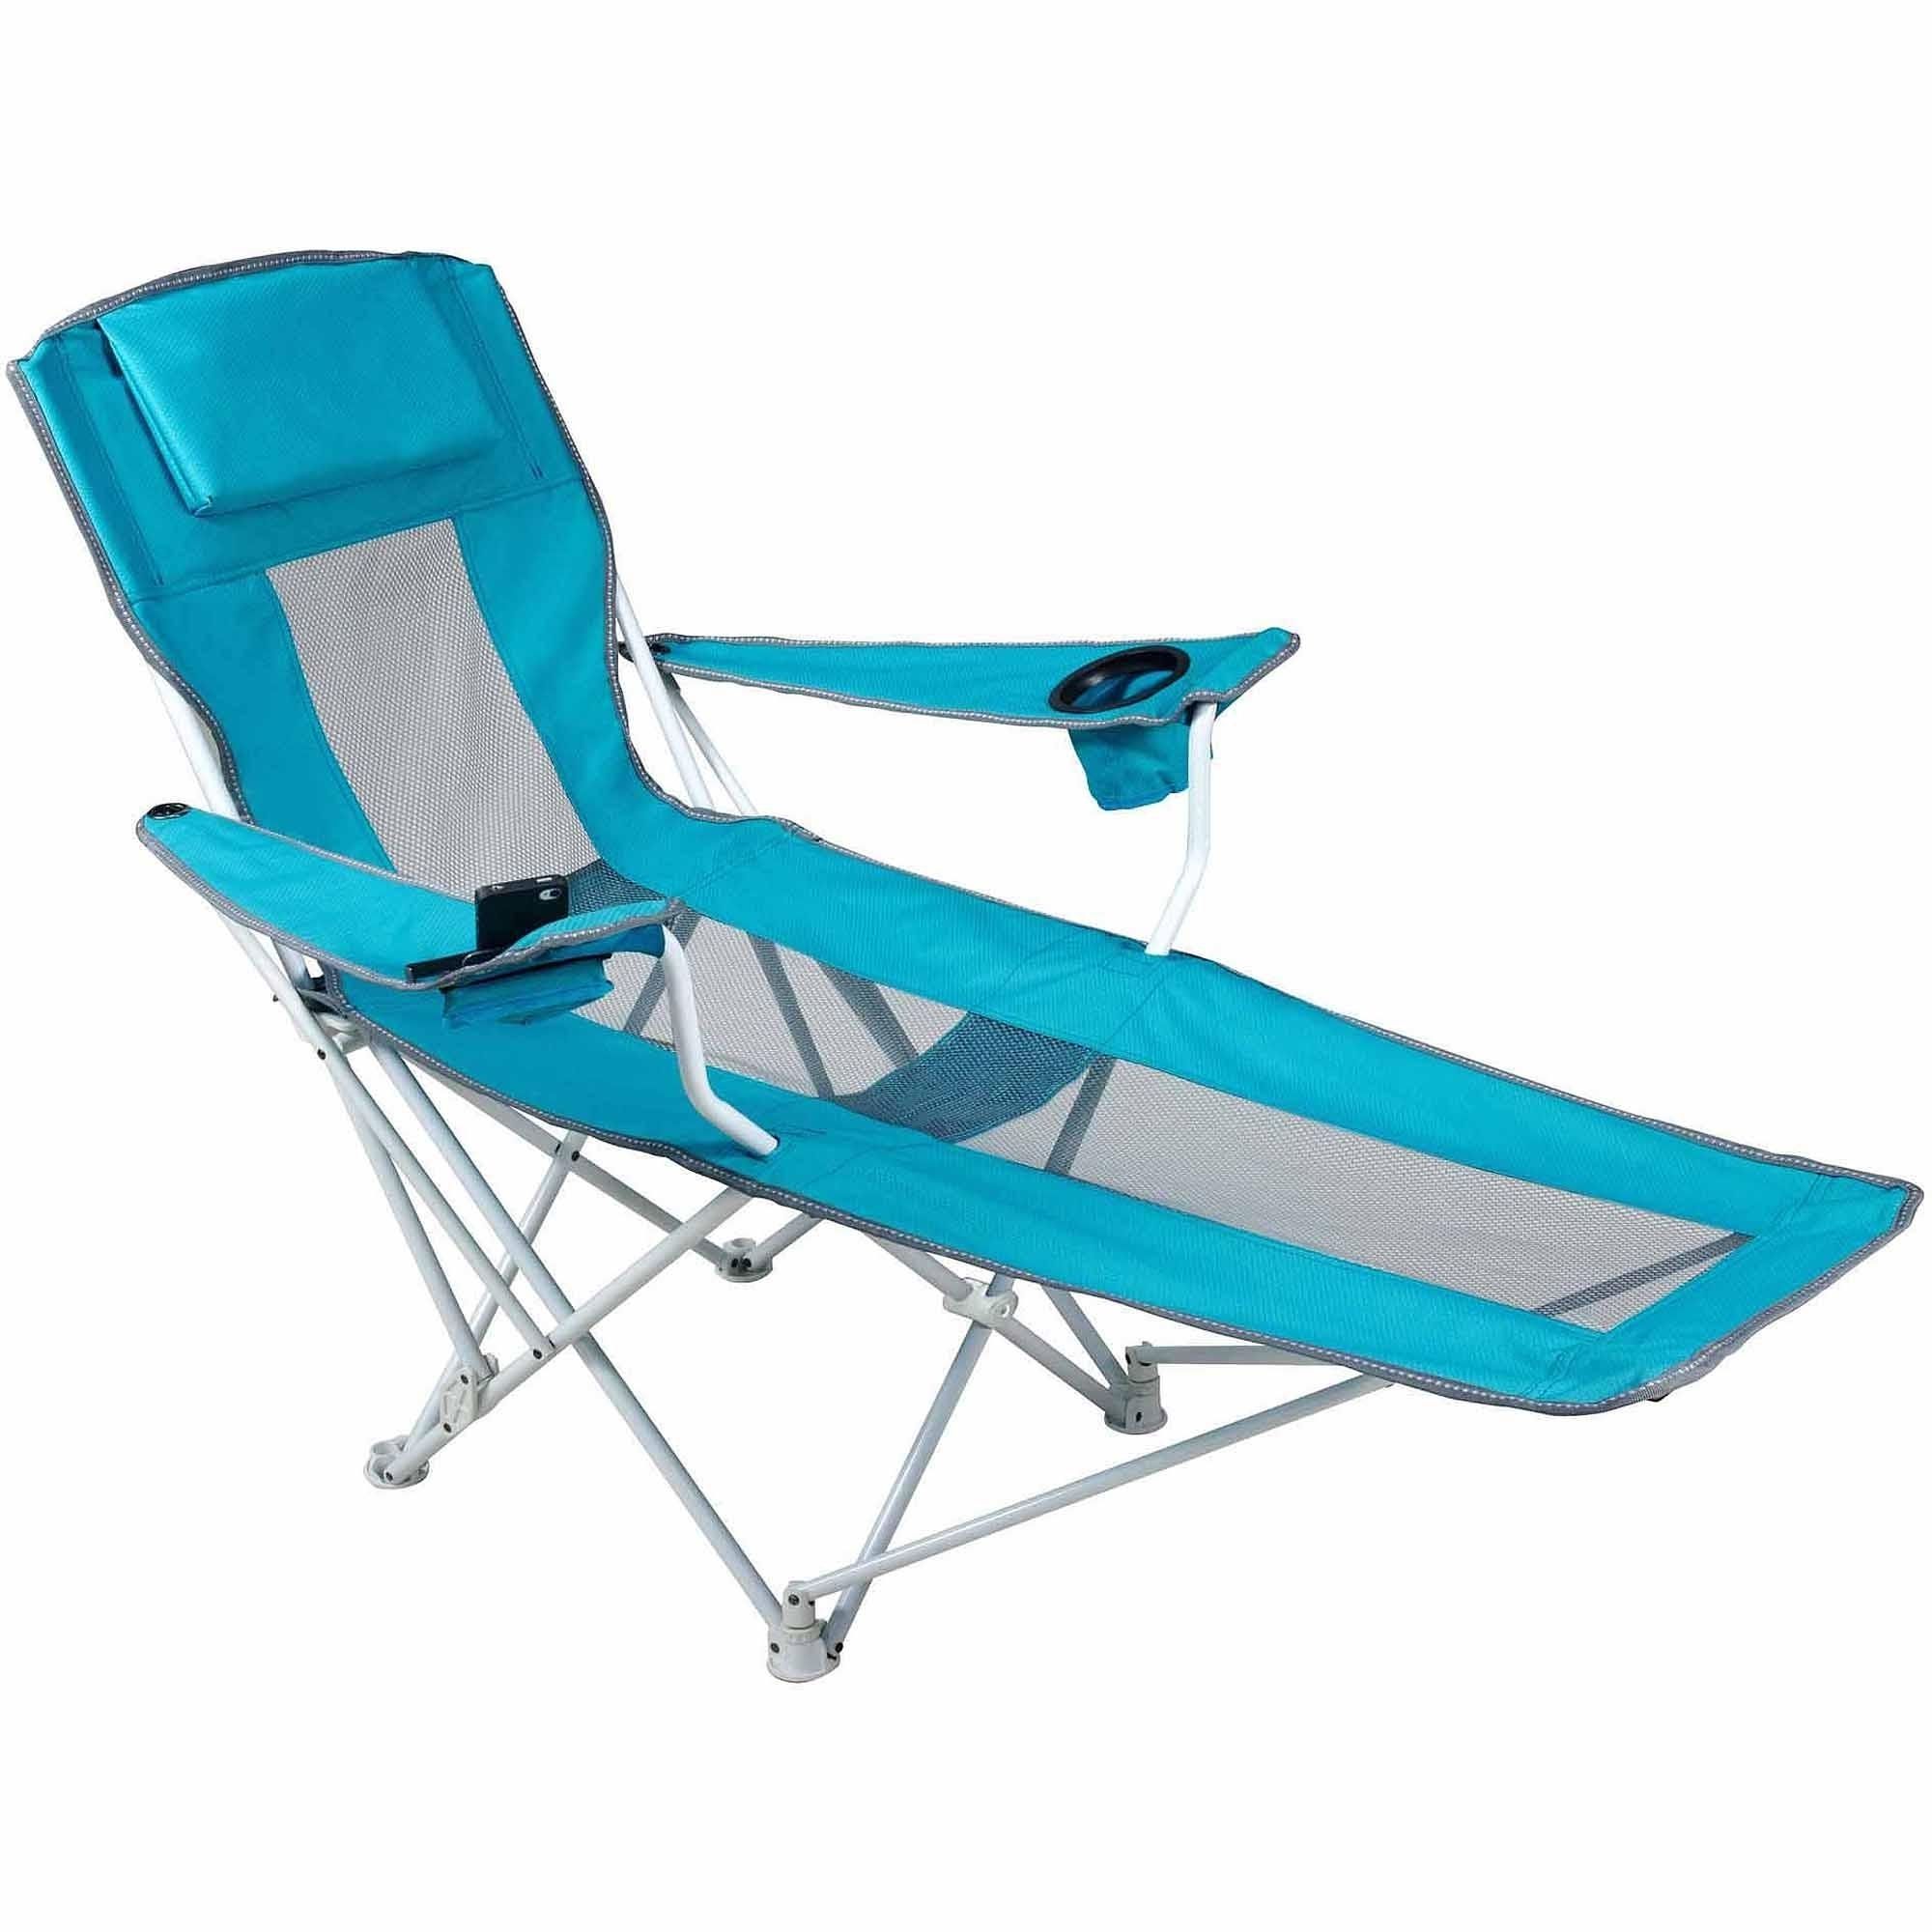 Outdoor : Beach Lounge Chair Beach Chairs Walmart Lounge Sofa Big Intended For Well Known Chaise Lounge Beach Chairs (View 9 of 15)